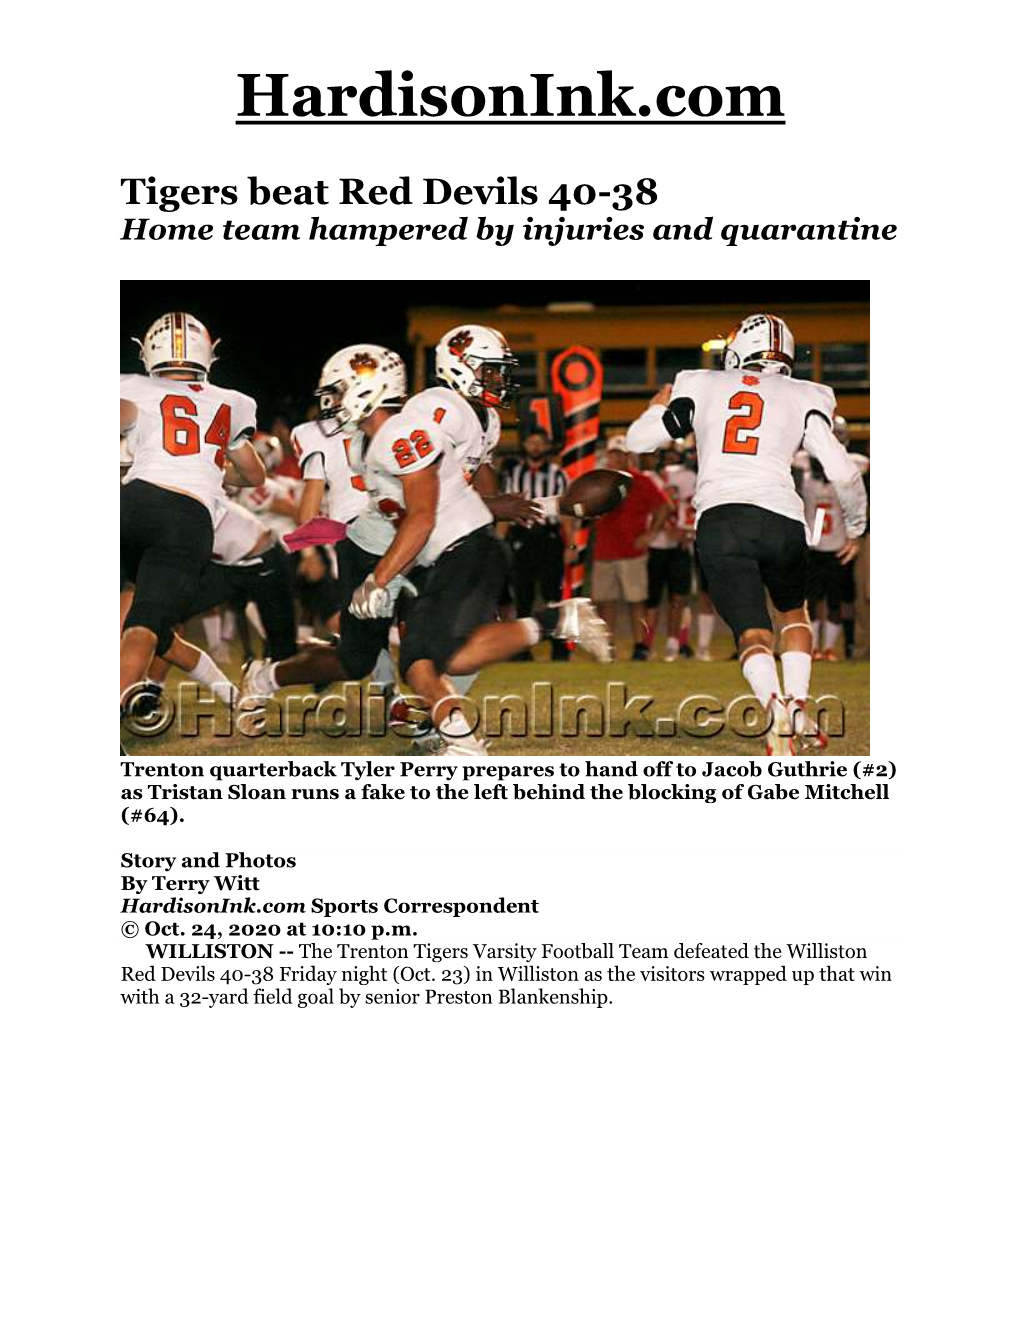 10-24-20 Tigers Beat Red Devils 40-38